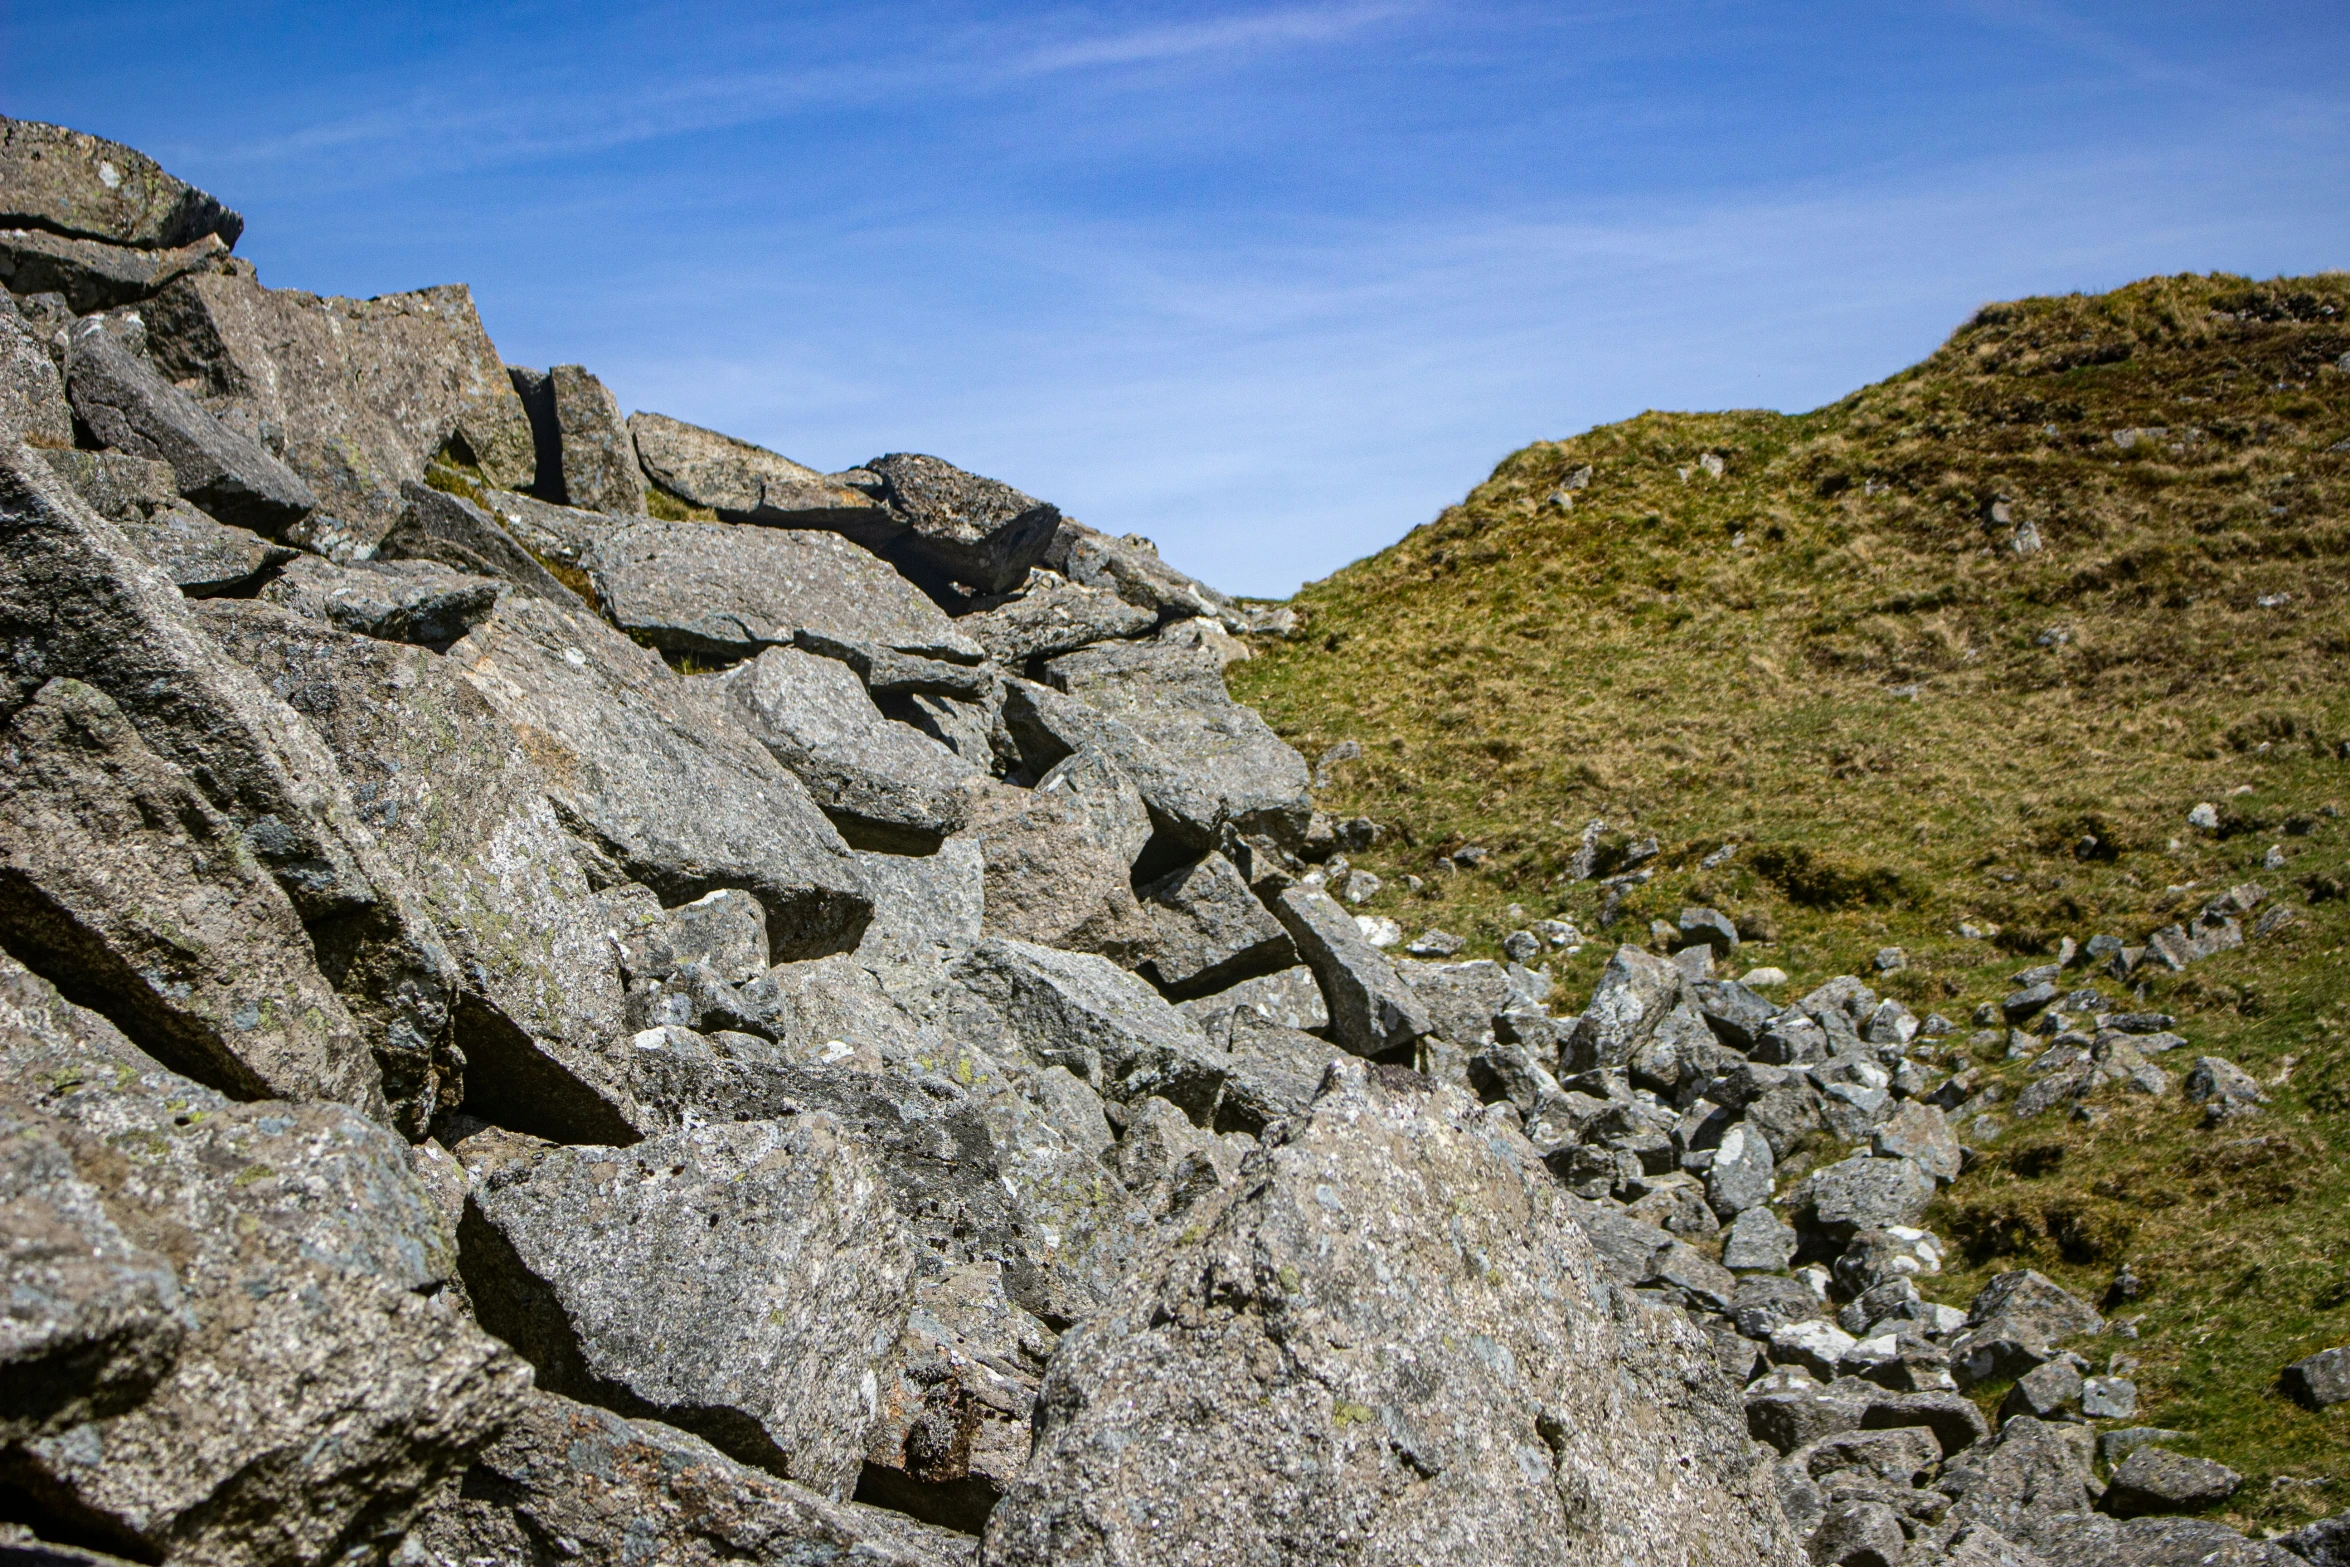 a person walking down a rocky slope next to a hill